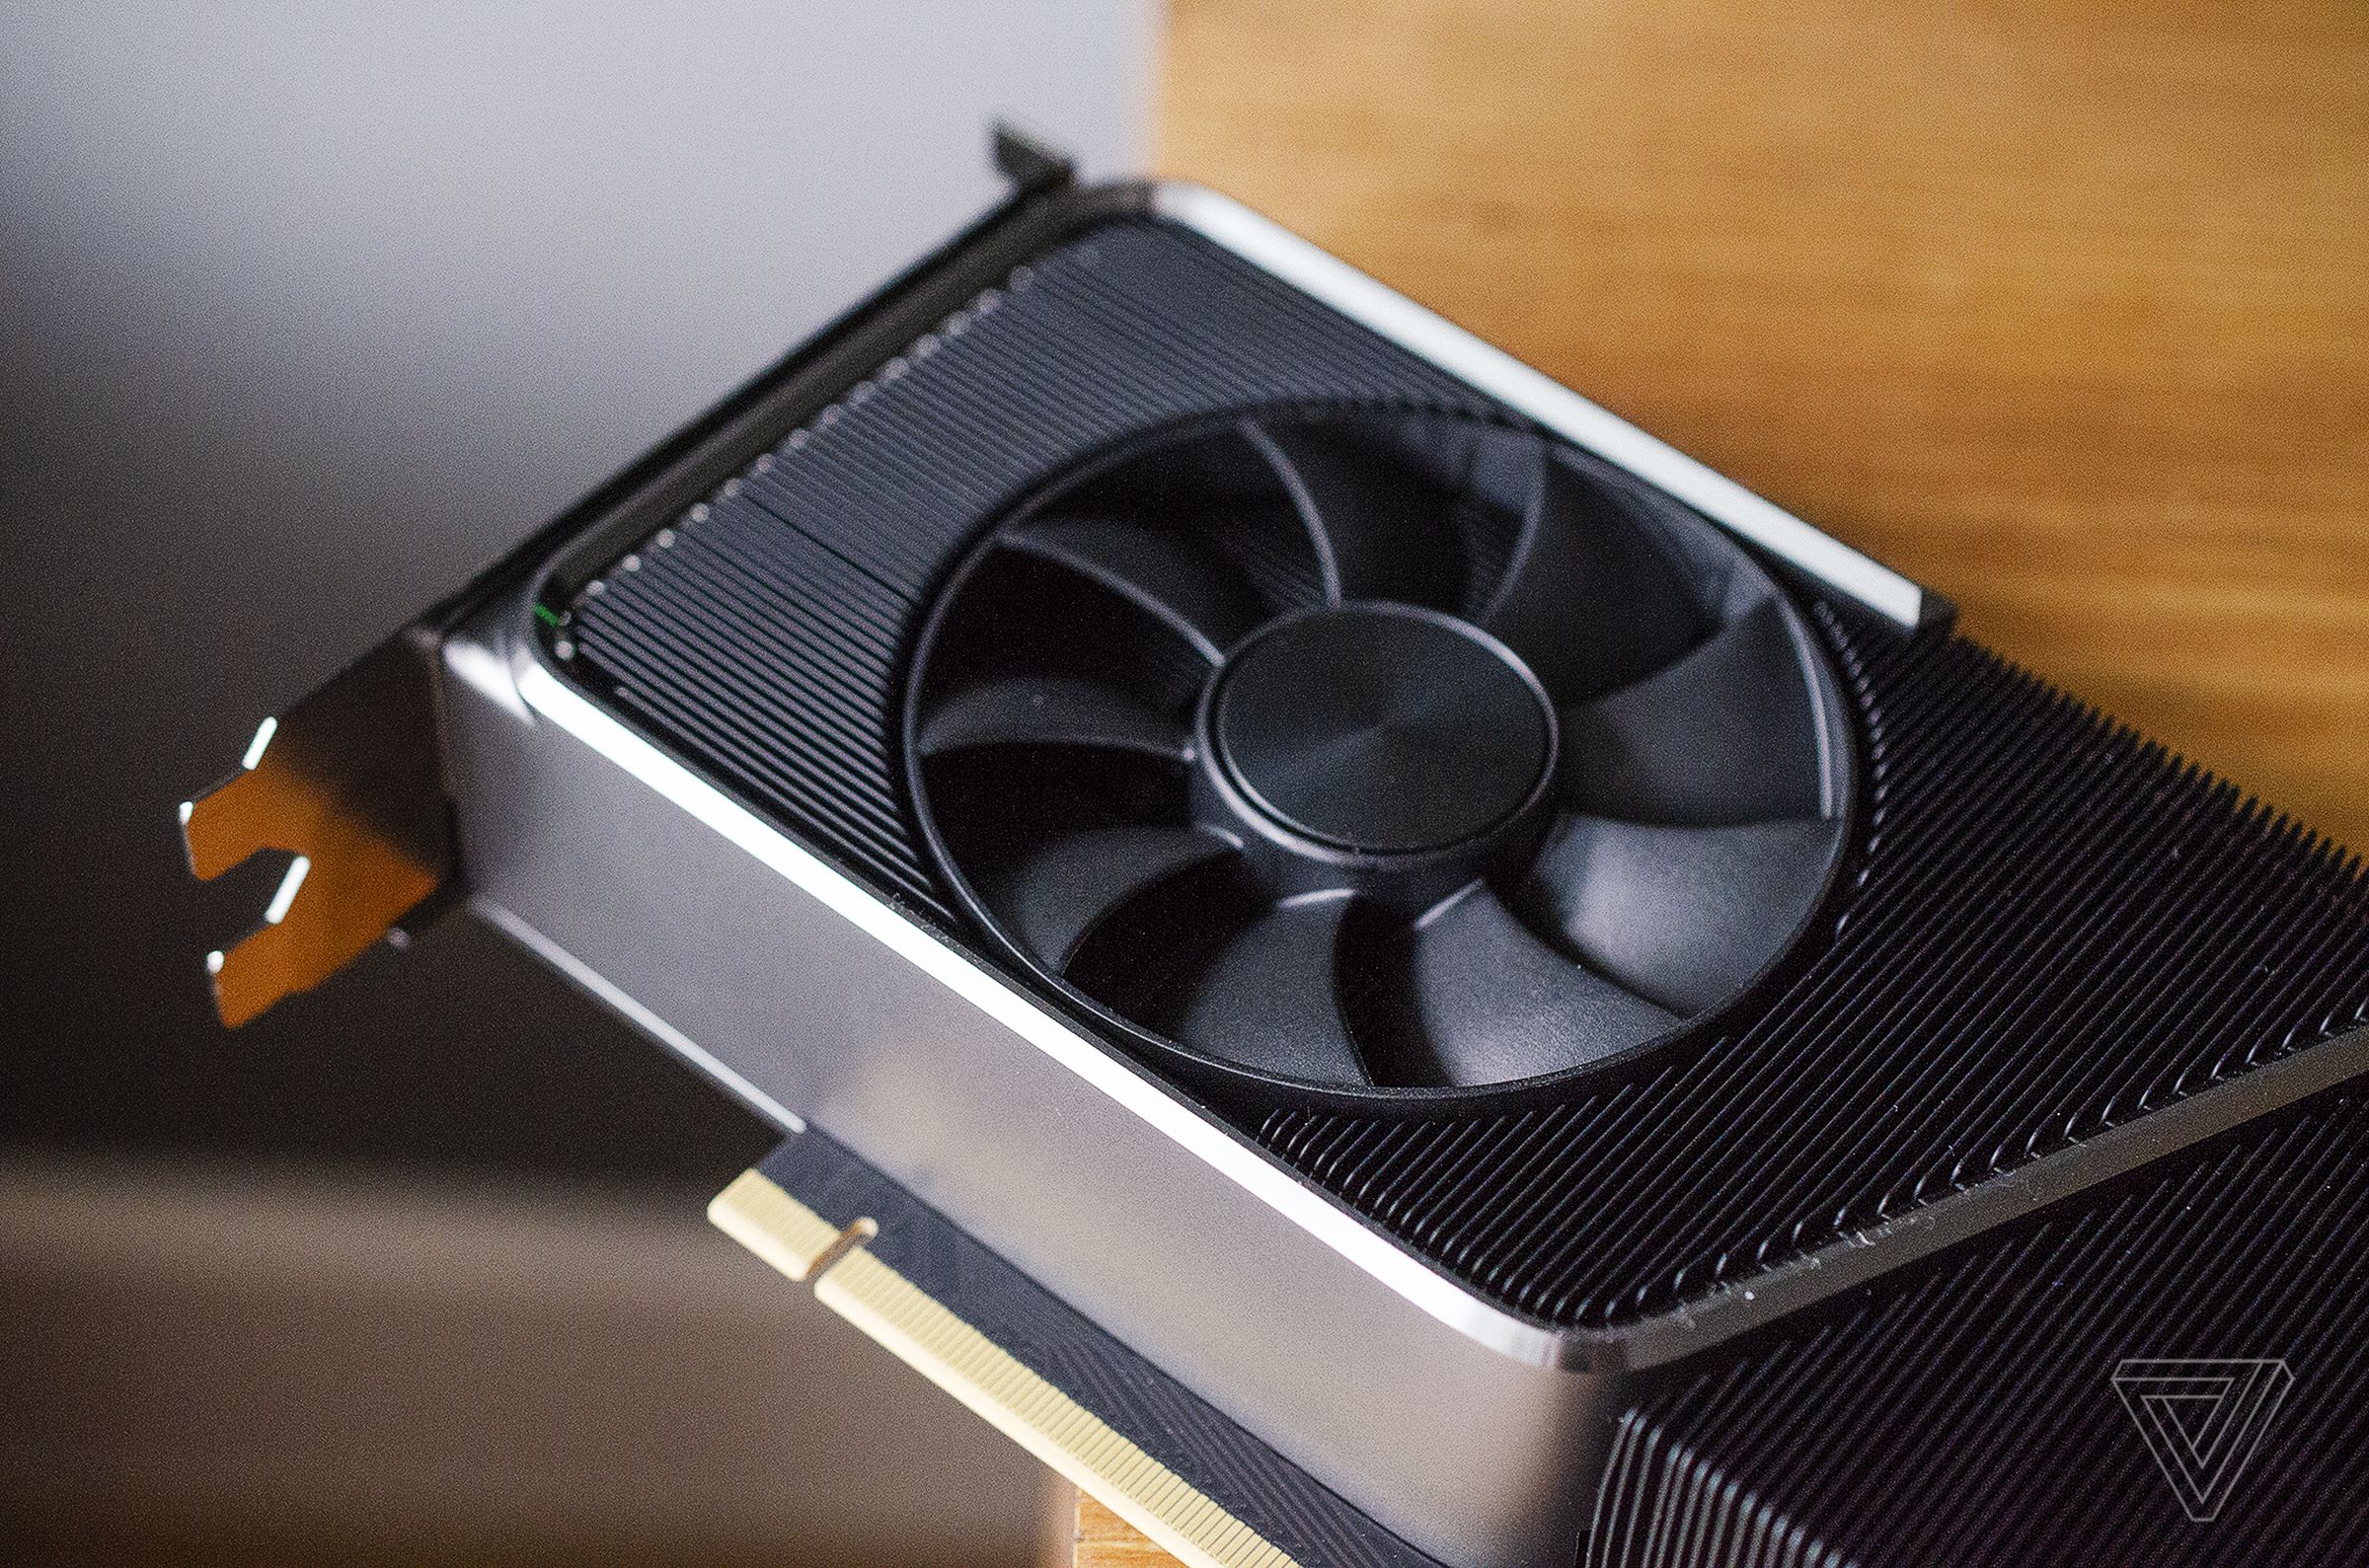 Nvidia’s RTX 3070 Ti keeps quiet during demanding games.